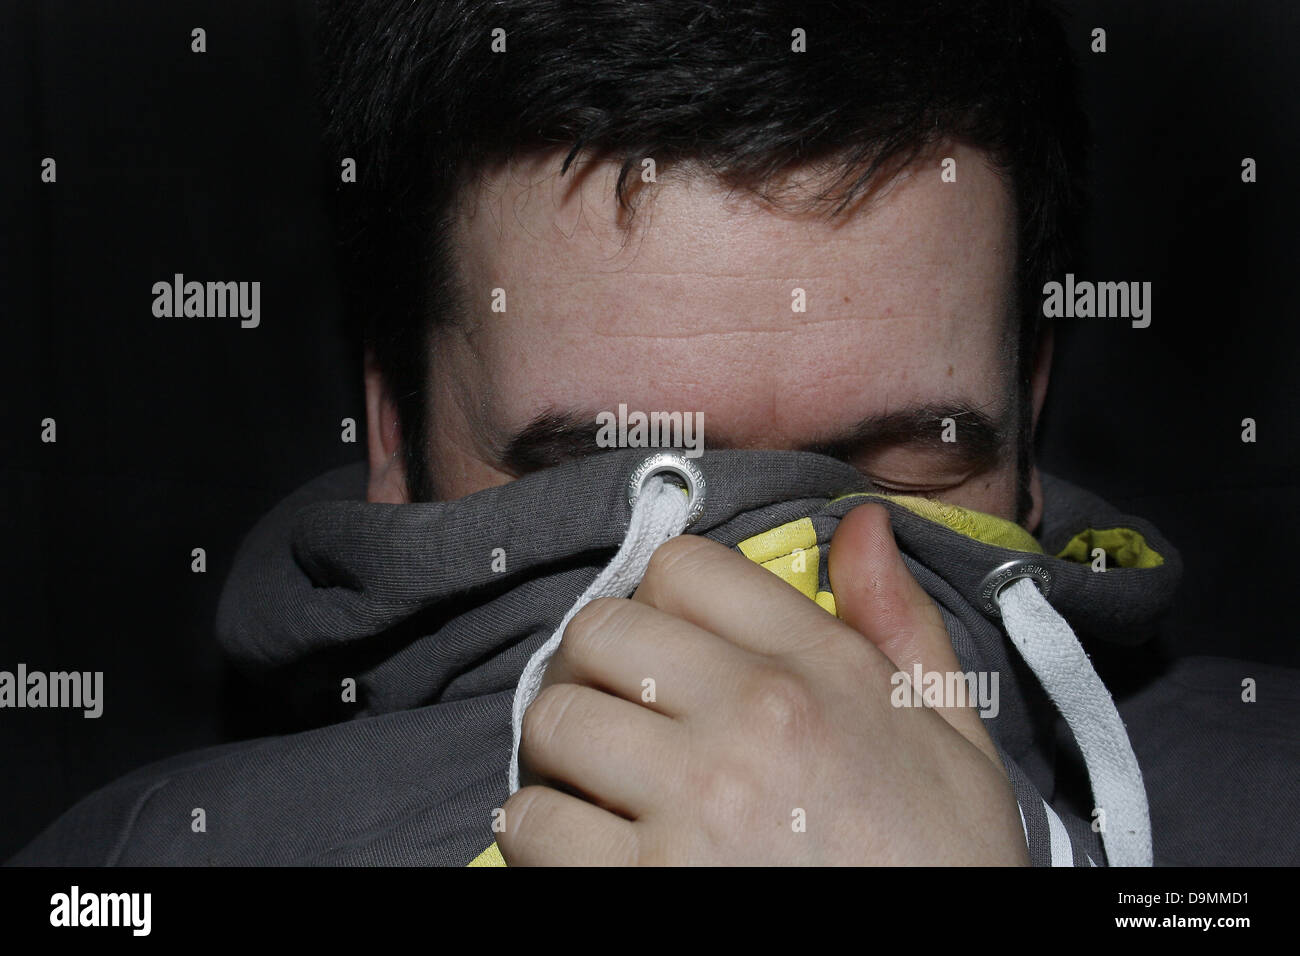 man hiding face with grey hoodie Stock Photo